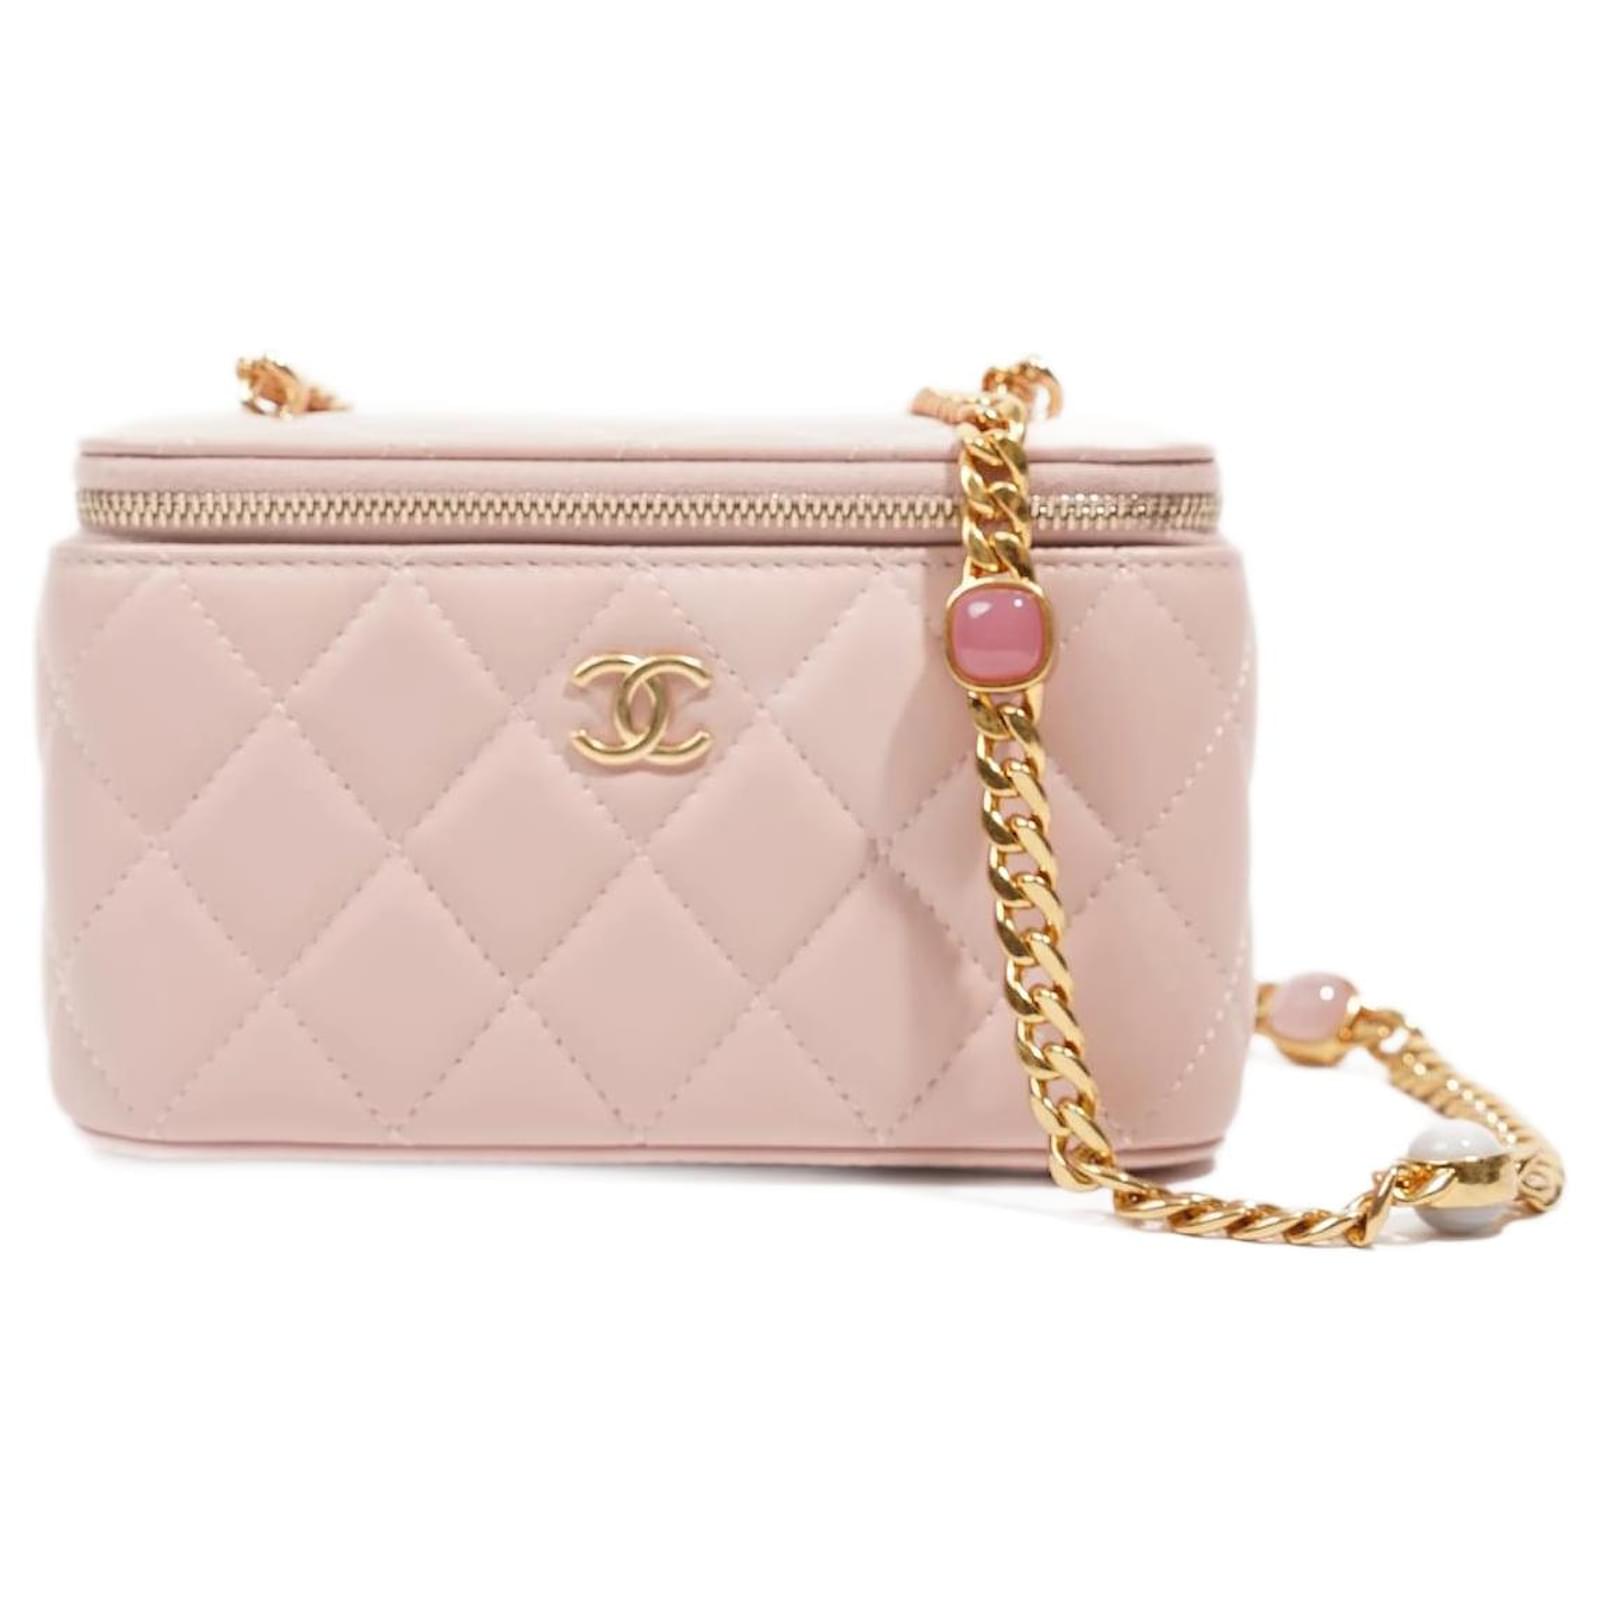 Chanel Pink Quilted Caviar Leather Mini Vanity Case with Chain Bag